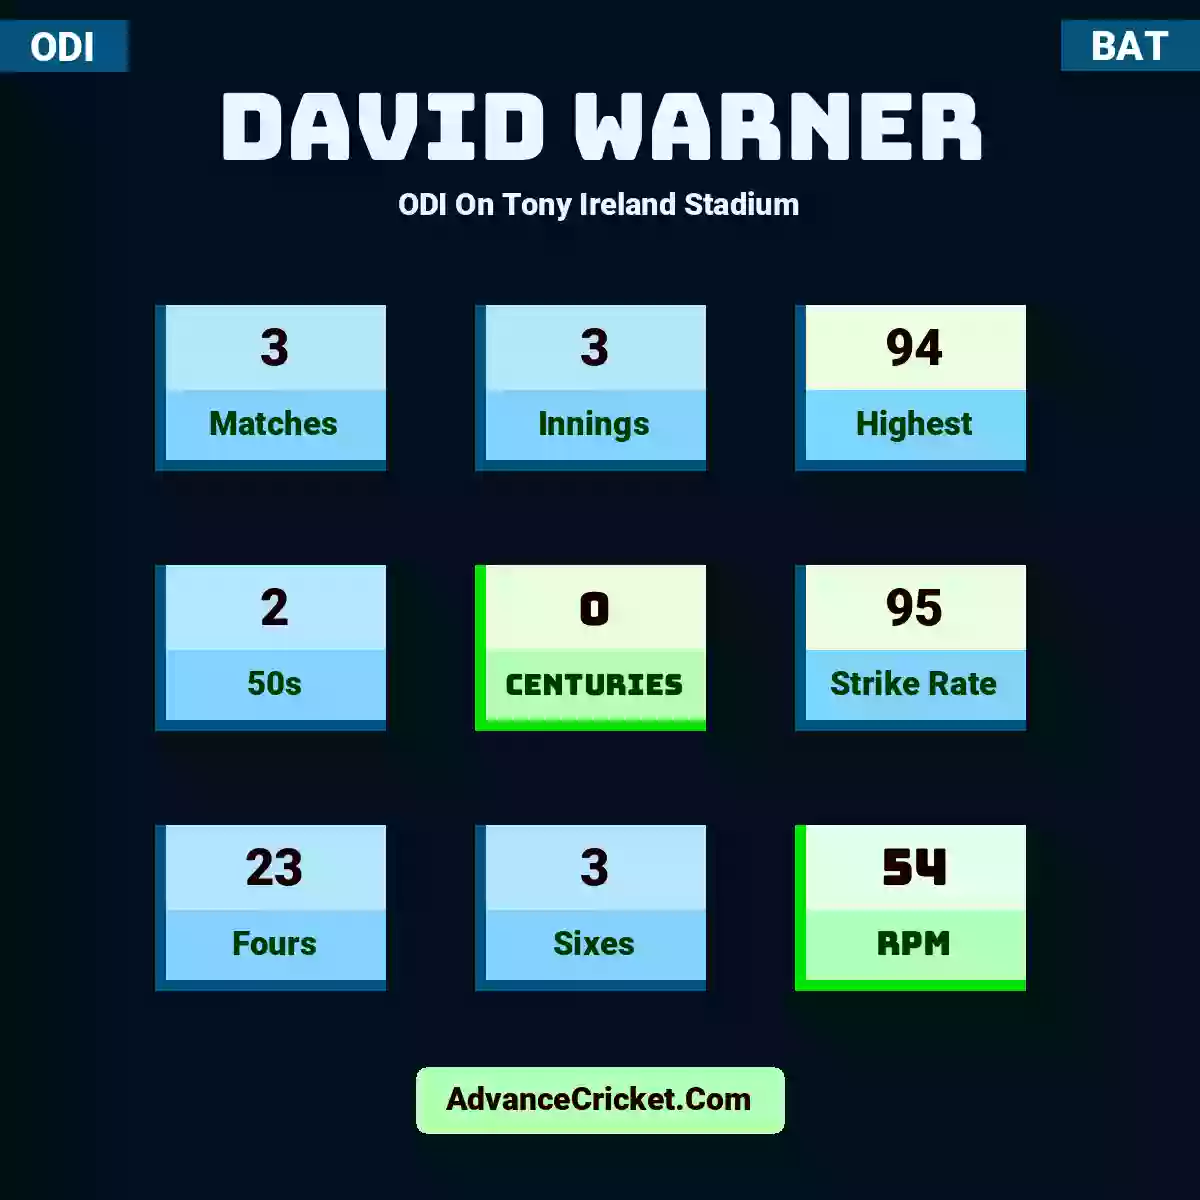 David Warner ODI  On Tony Ireland Stadium, David Warner played 3 matches, scored 94 runs as highest, 2 half-centuries, and 0 centuries, with a strike rate of 95. D.Warner hit 23 fours and 3 sixes, with an RPM of 54.